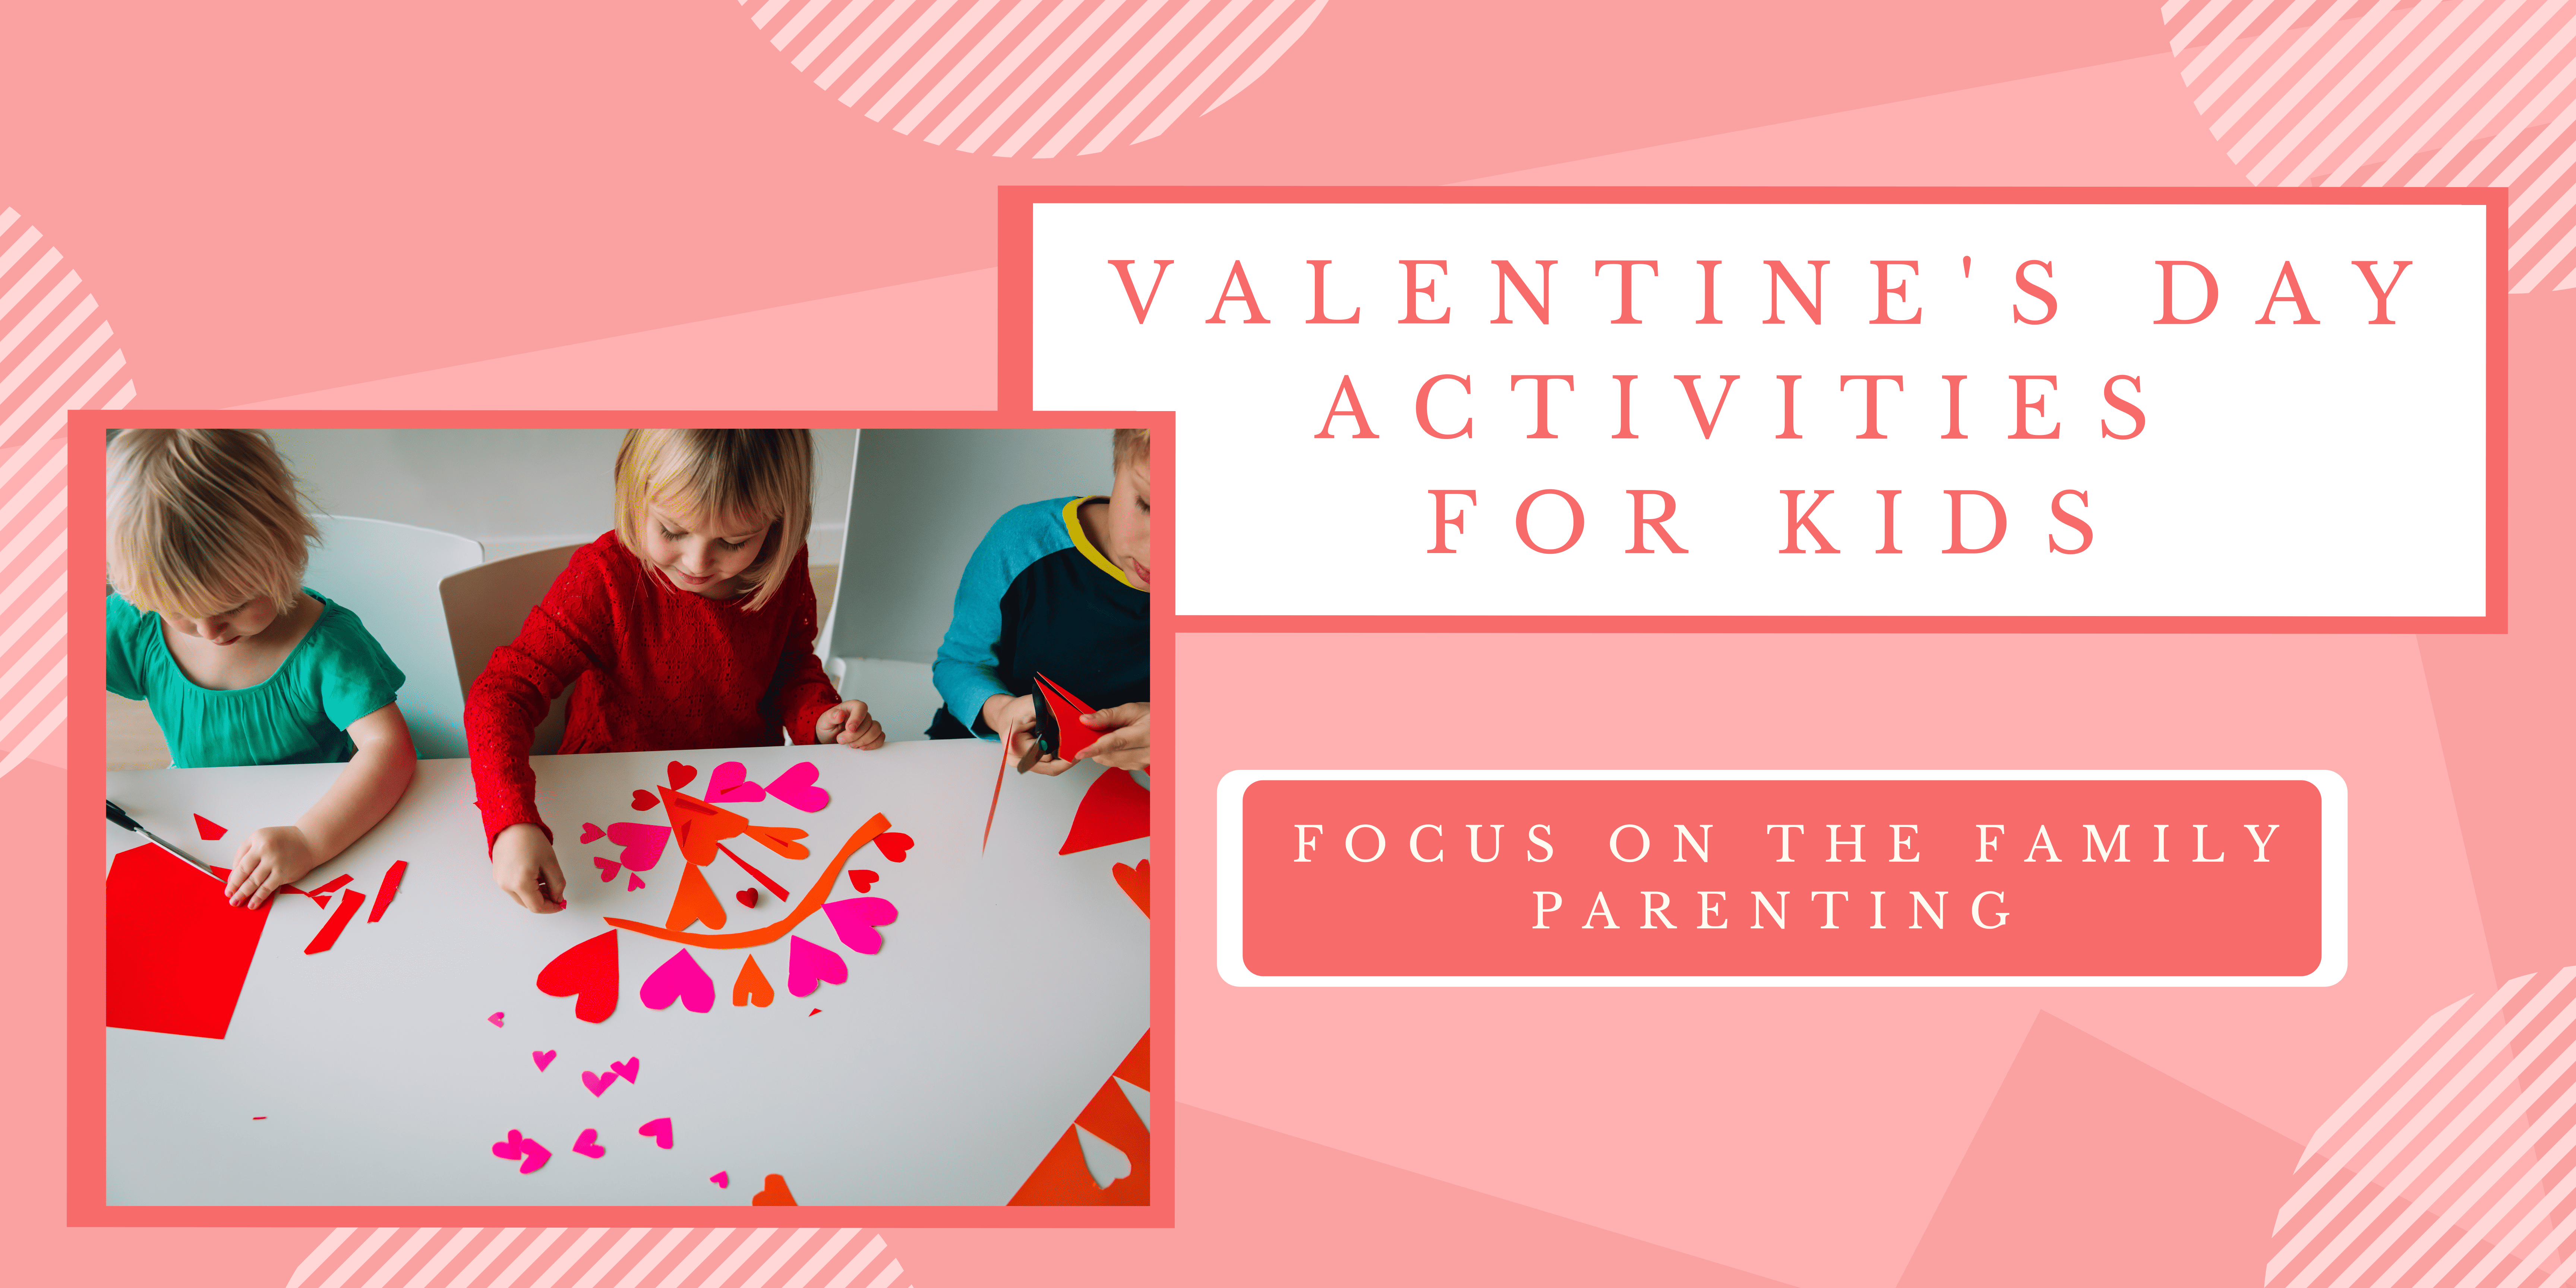 Sexi Tichar Hd Video Downlof - Valentine's Day Activities for Kids - Focus on the Family